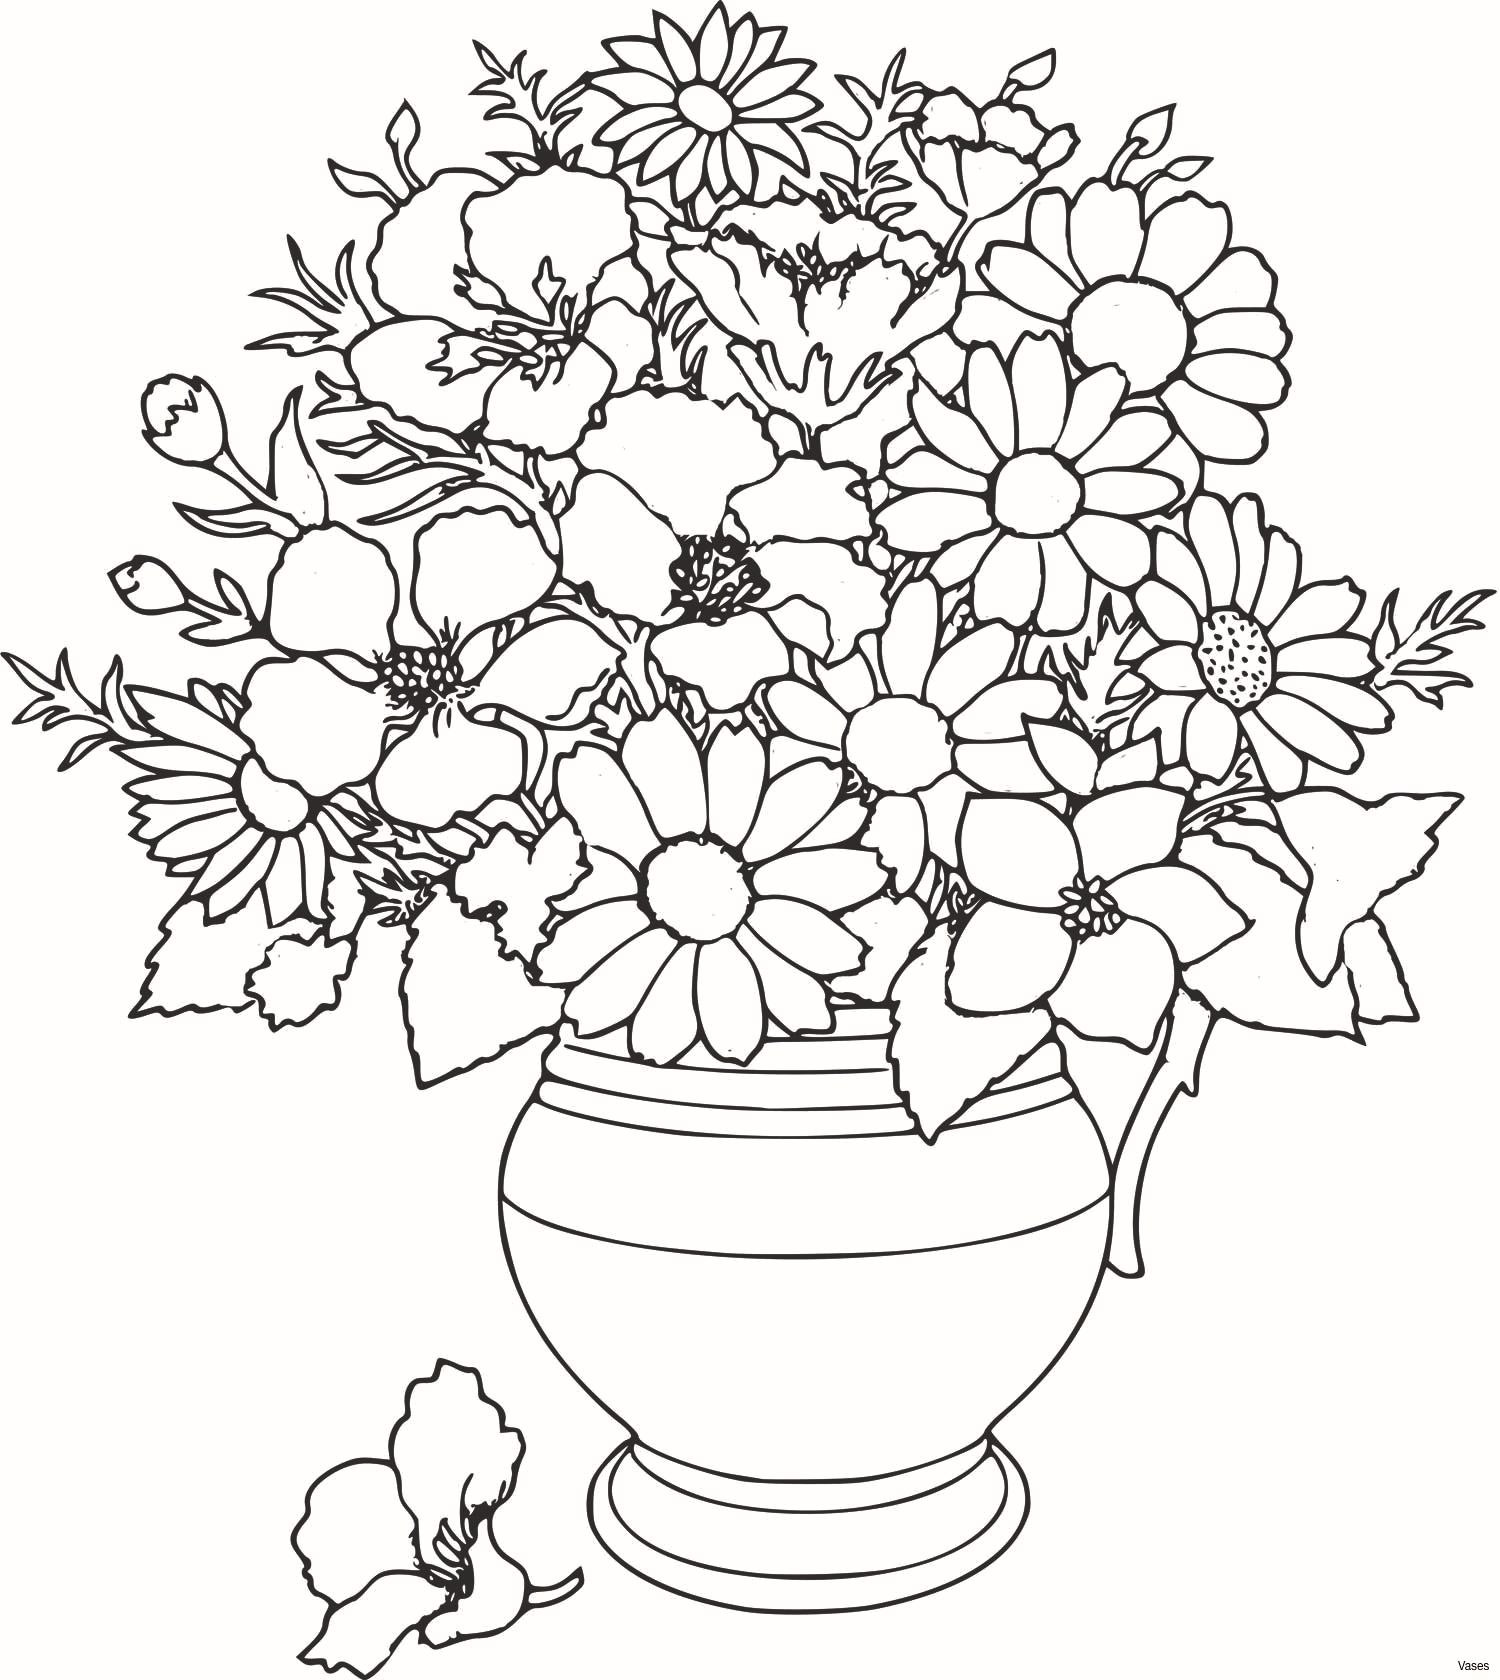 30 Ideal Best Flowers for Small Vases 2024 free download best flowers for small vases of flower in a vase beautiful flowers coloring pages luxury cool vases inside flower in a vase beautiful flowers coloring pages luxury cool vases flower vase col